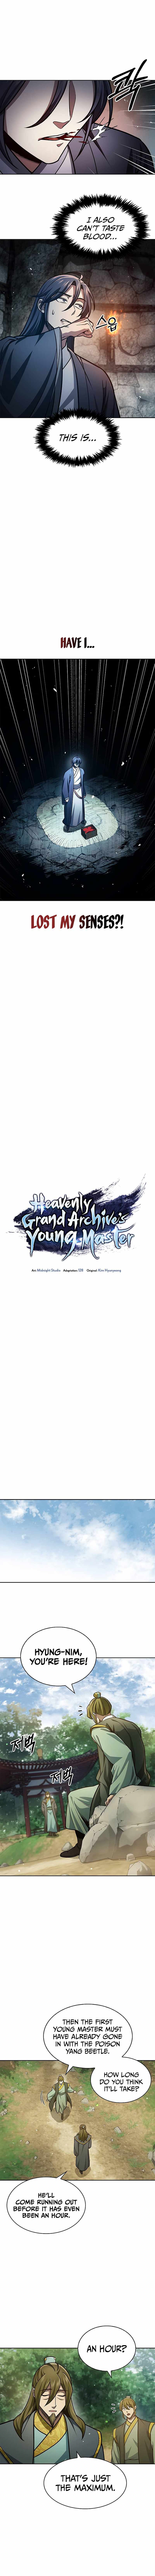 Heavenly Grand Archive’s Young Master Chapter 42